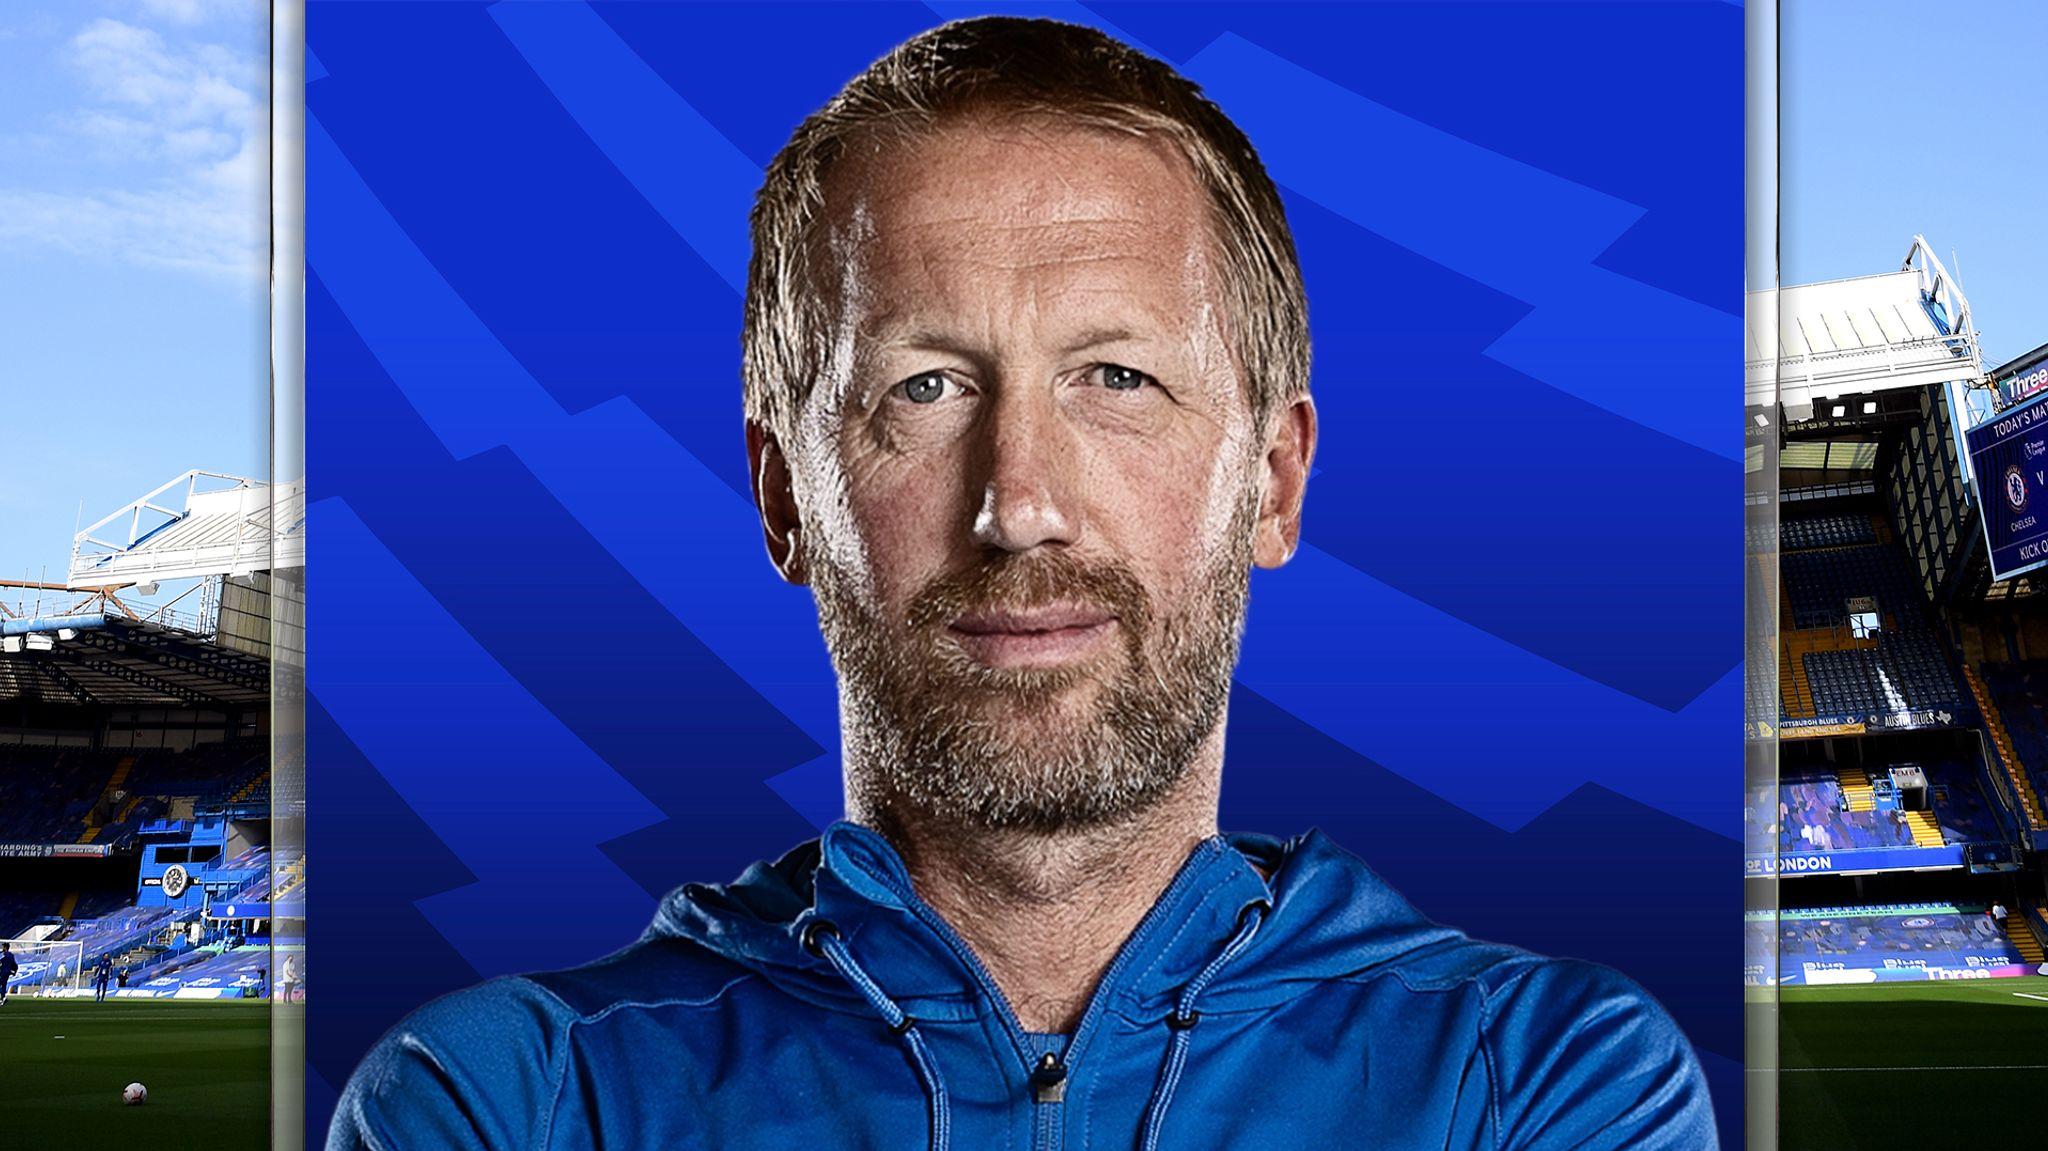 Graham Potter announced as Chelseas new head coach on a five year